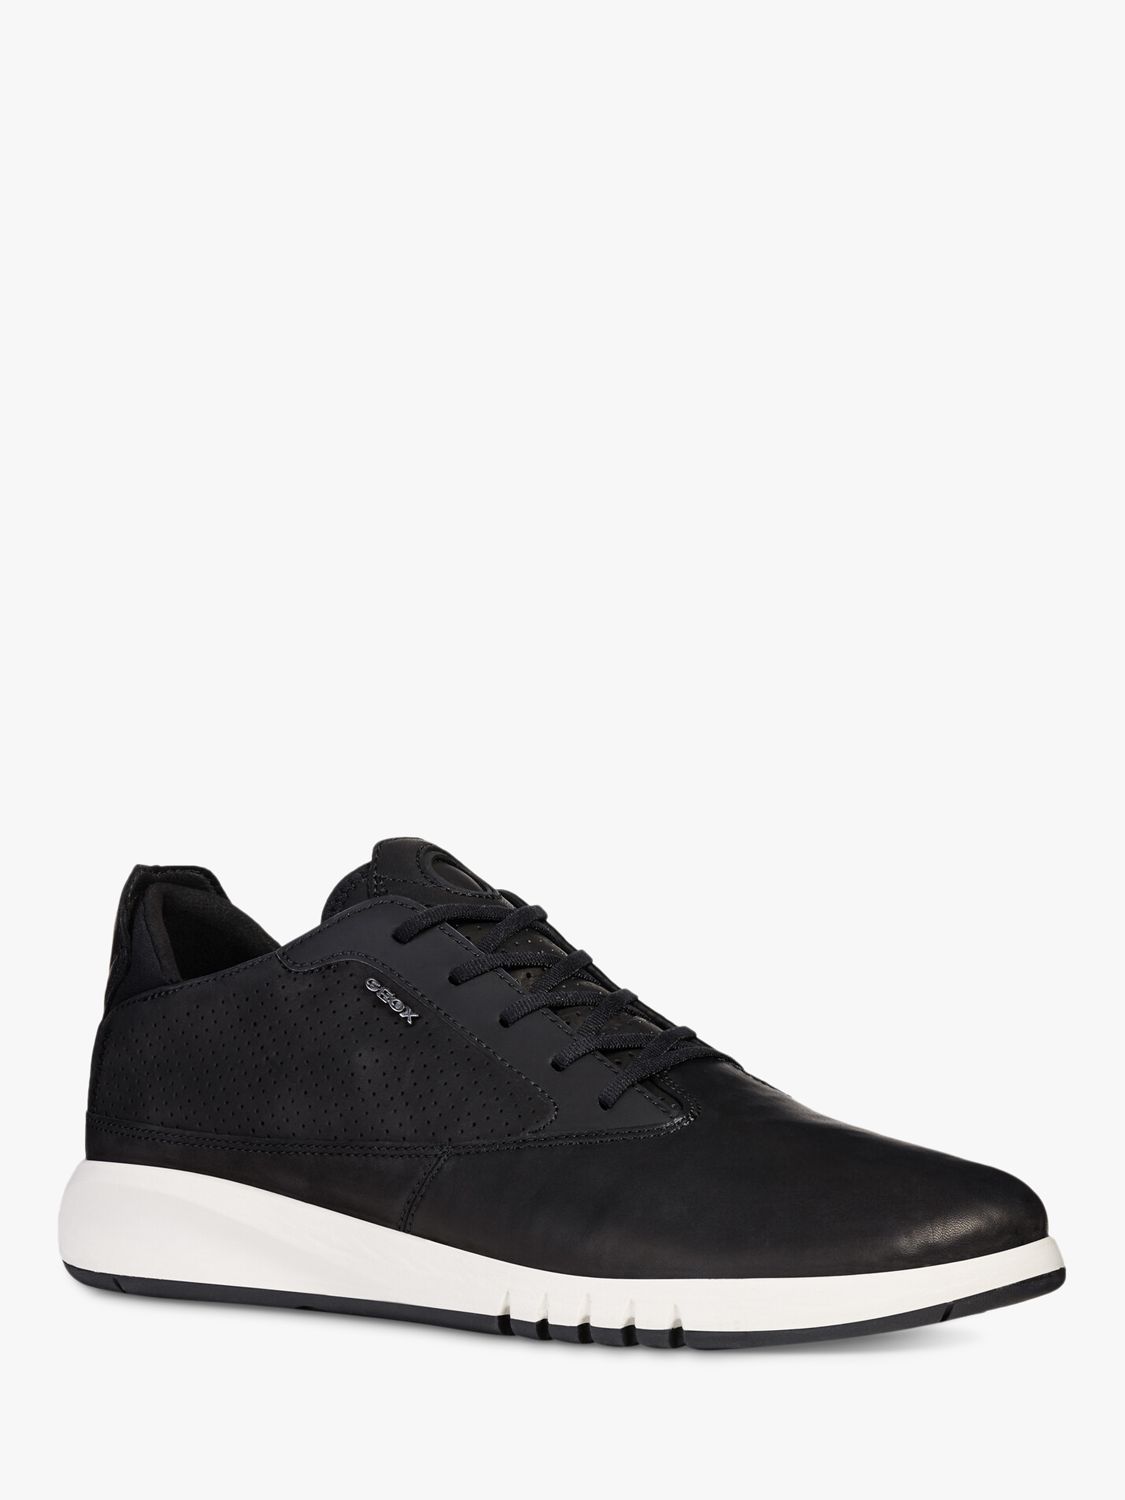 Geox Aerantis Leather Trainers at John Lewis & Partners